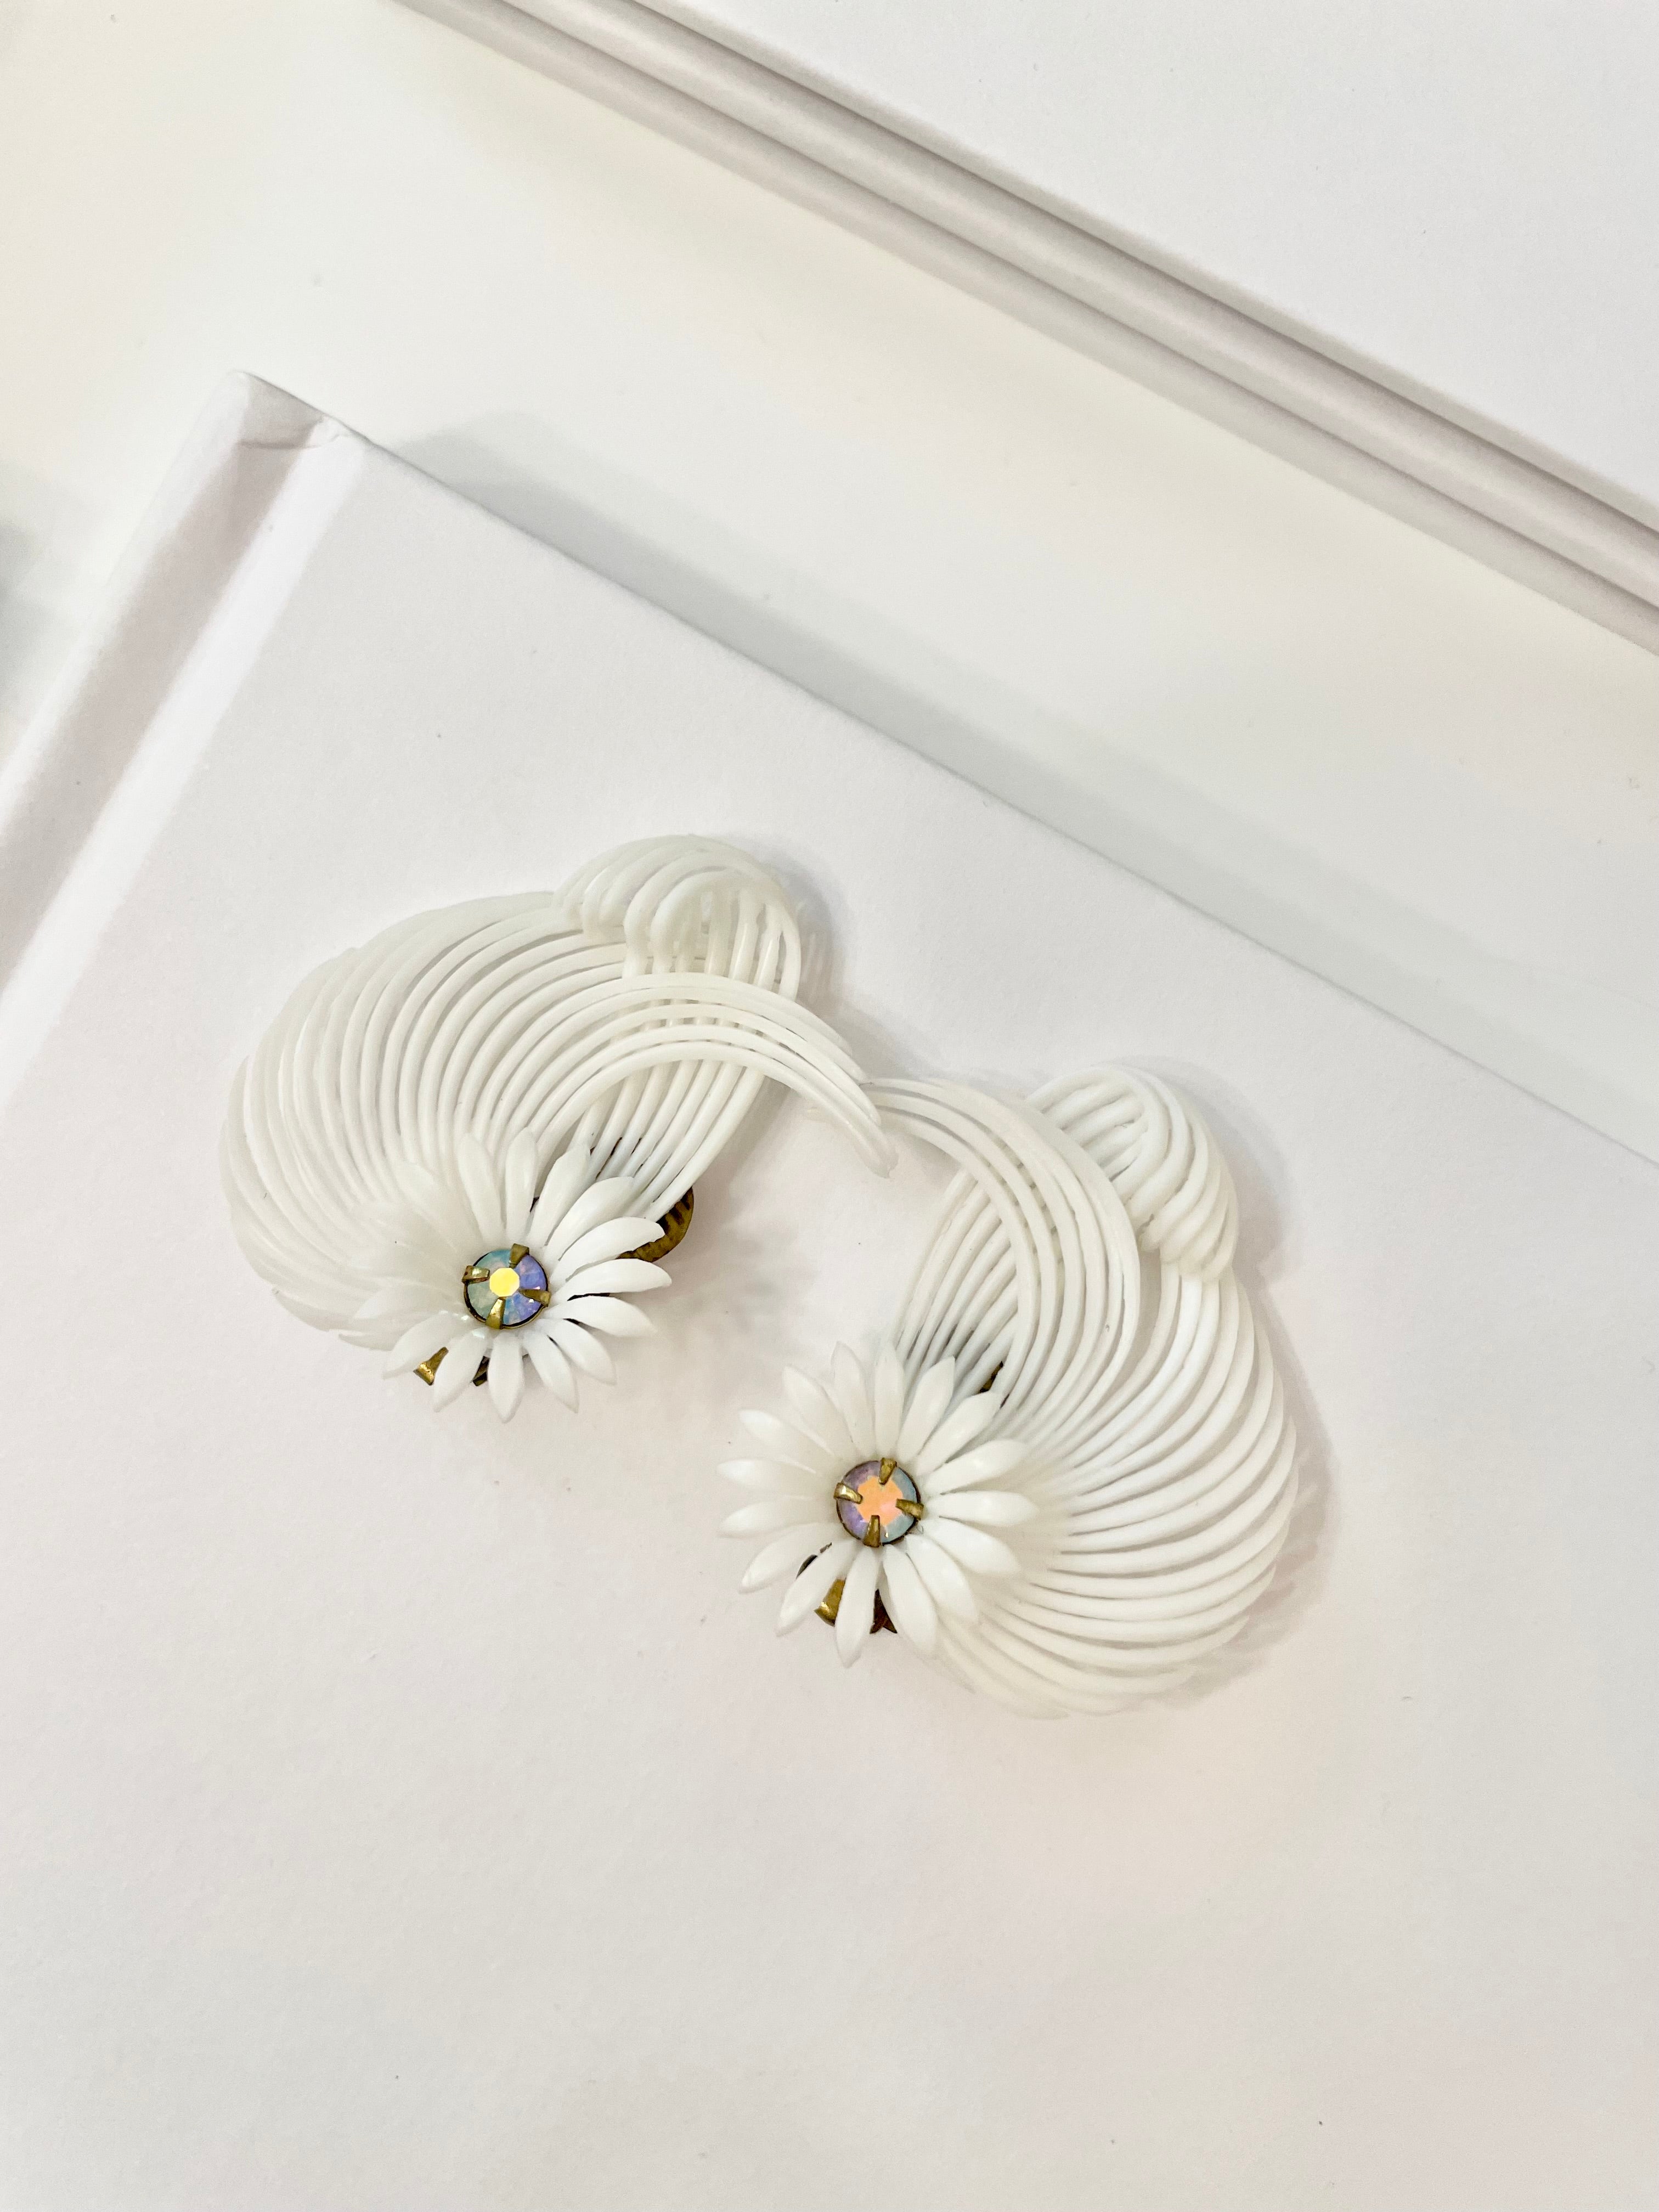 The Cheeky Mistress and her love of the unusual..these 1960's white fan style earrings are so chic!